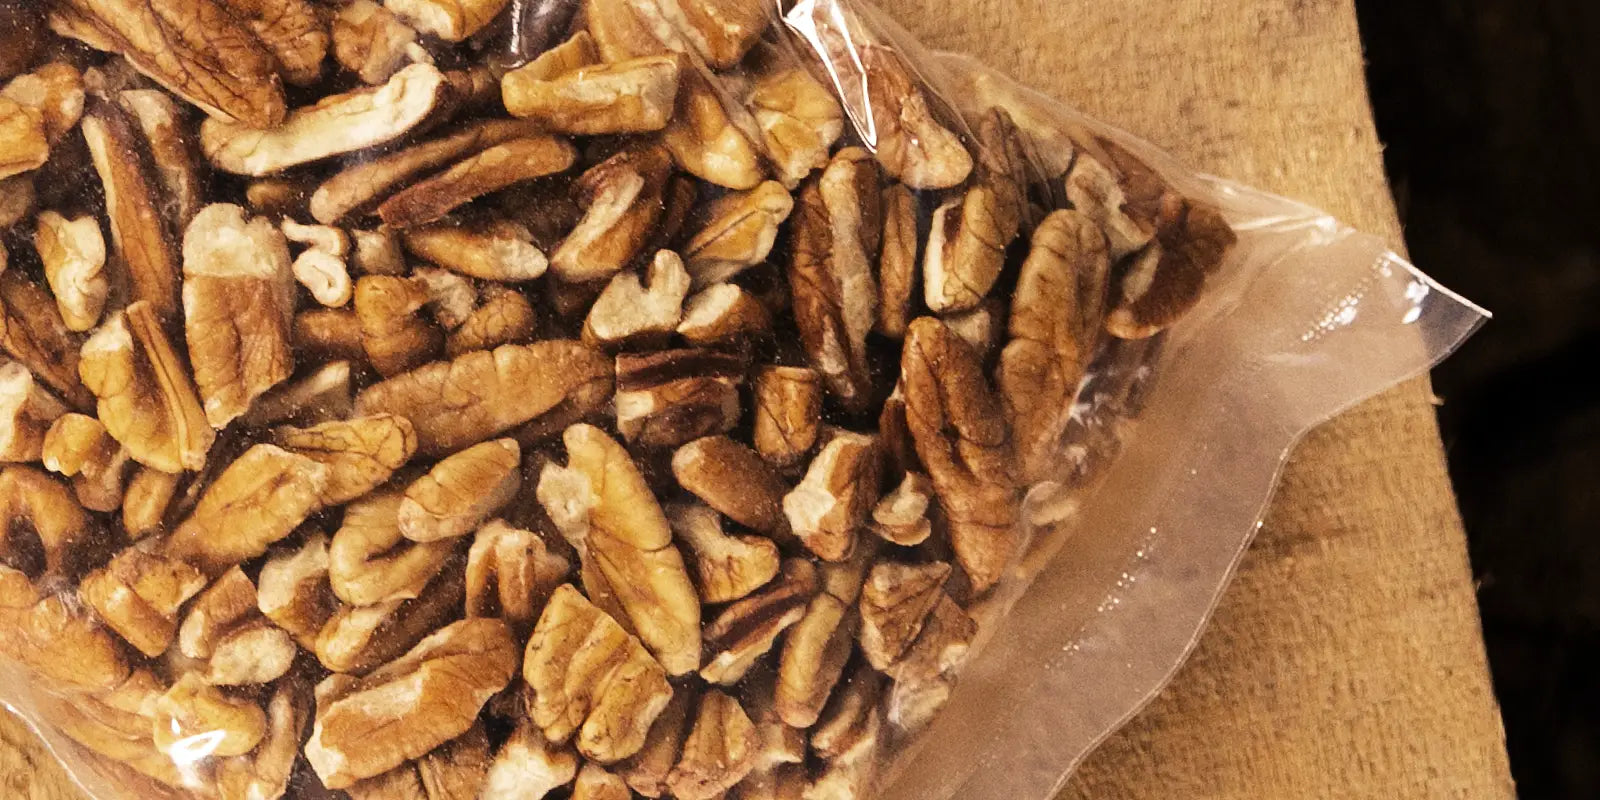 Clear plastic bag of raw pecan pieces on a wood table